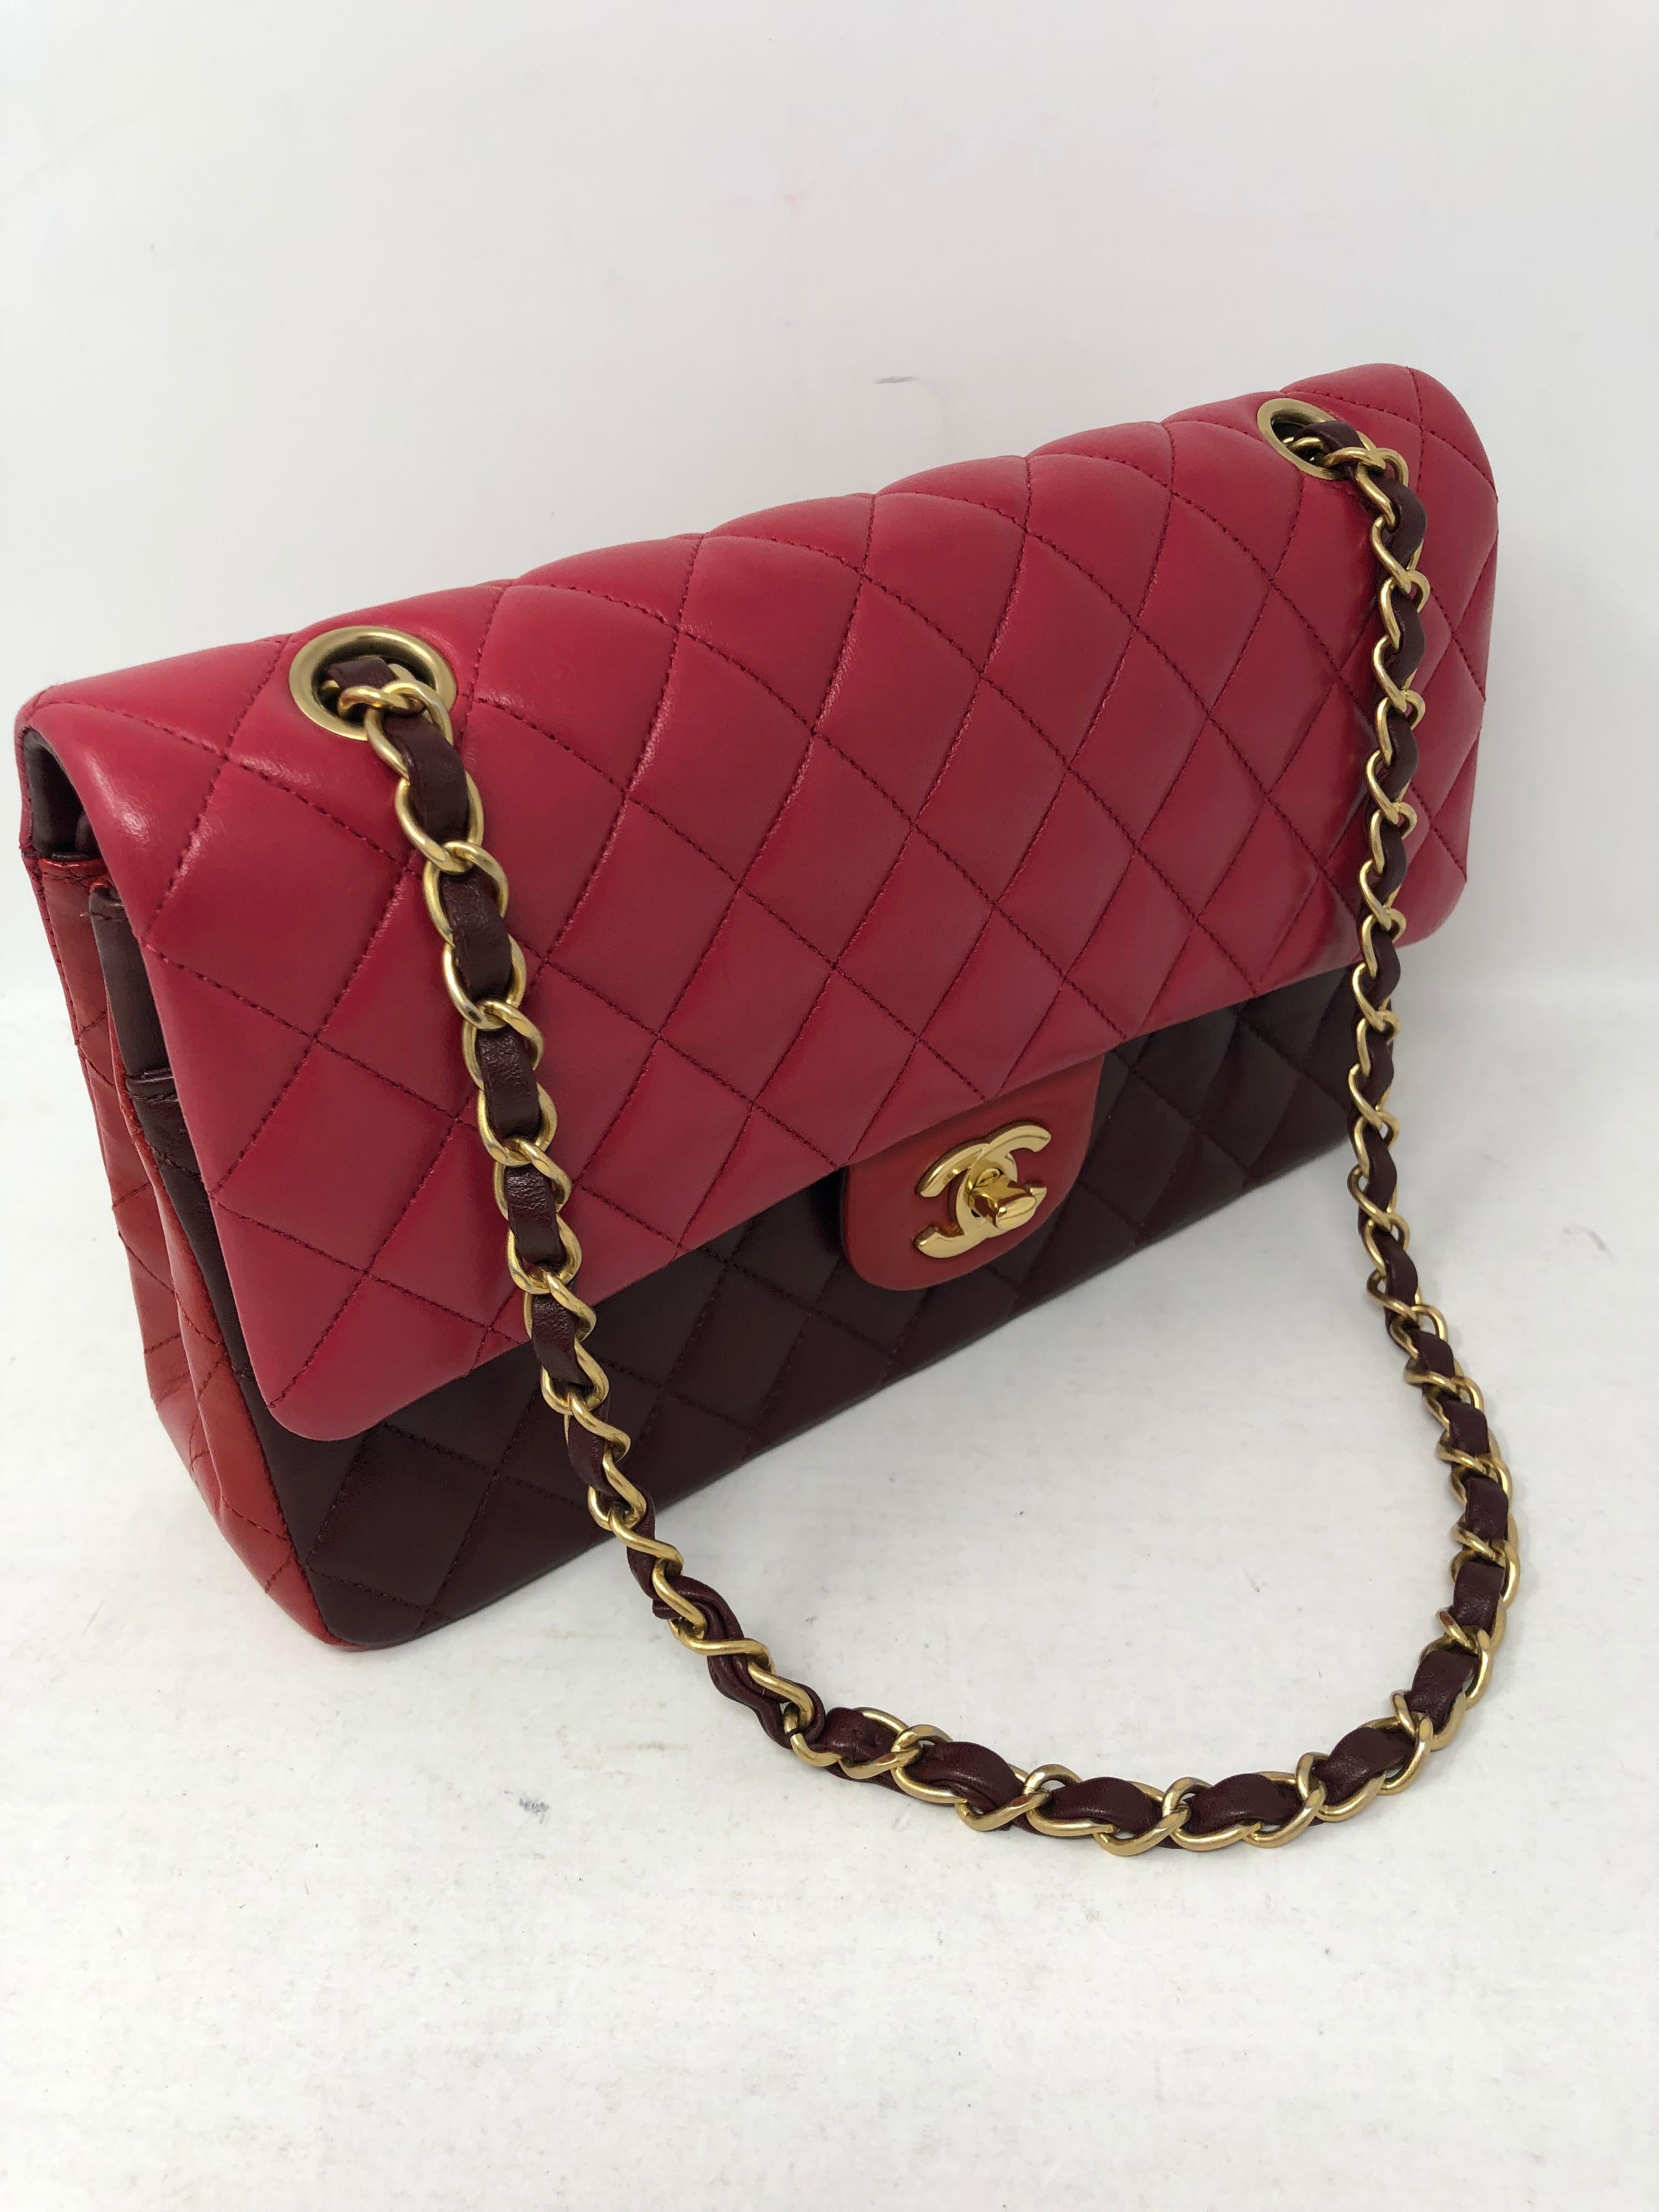 Chanel Red Multicolor Double Flap. Medium size. Lambskin leather. Matte Gold hardware. Mint like new condition. Beautiful combination of shades of red. Most wanted style bag. Limited edition. Includes authenticity card. Guaranteed authentic. 